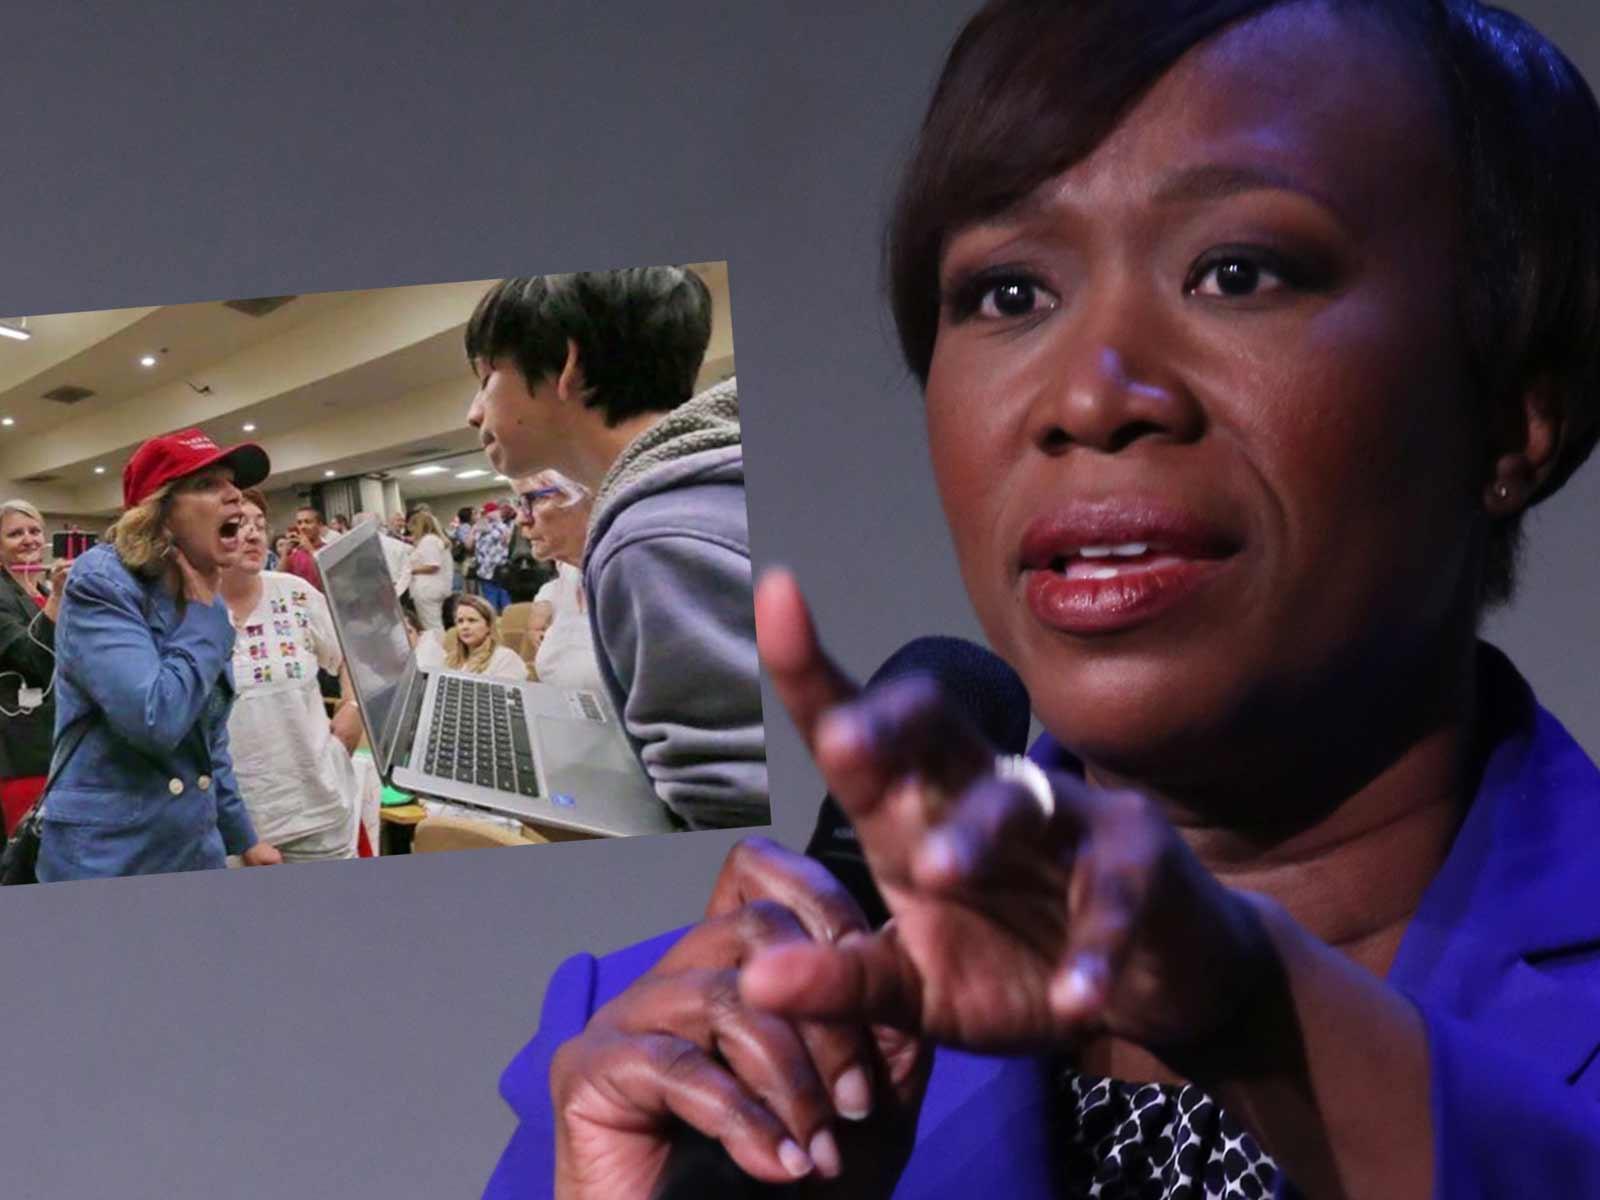 MSNBC Host Joy Reid Sued by Trump Supporter Over Claims She Hurled Racial Slurs at Teenager